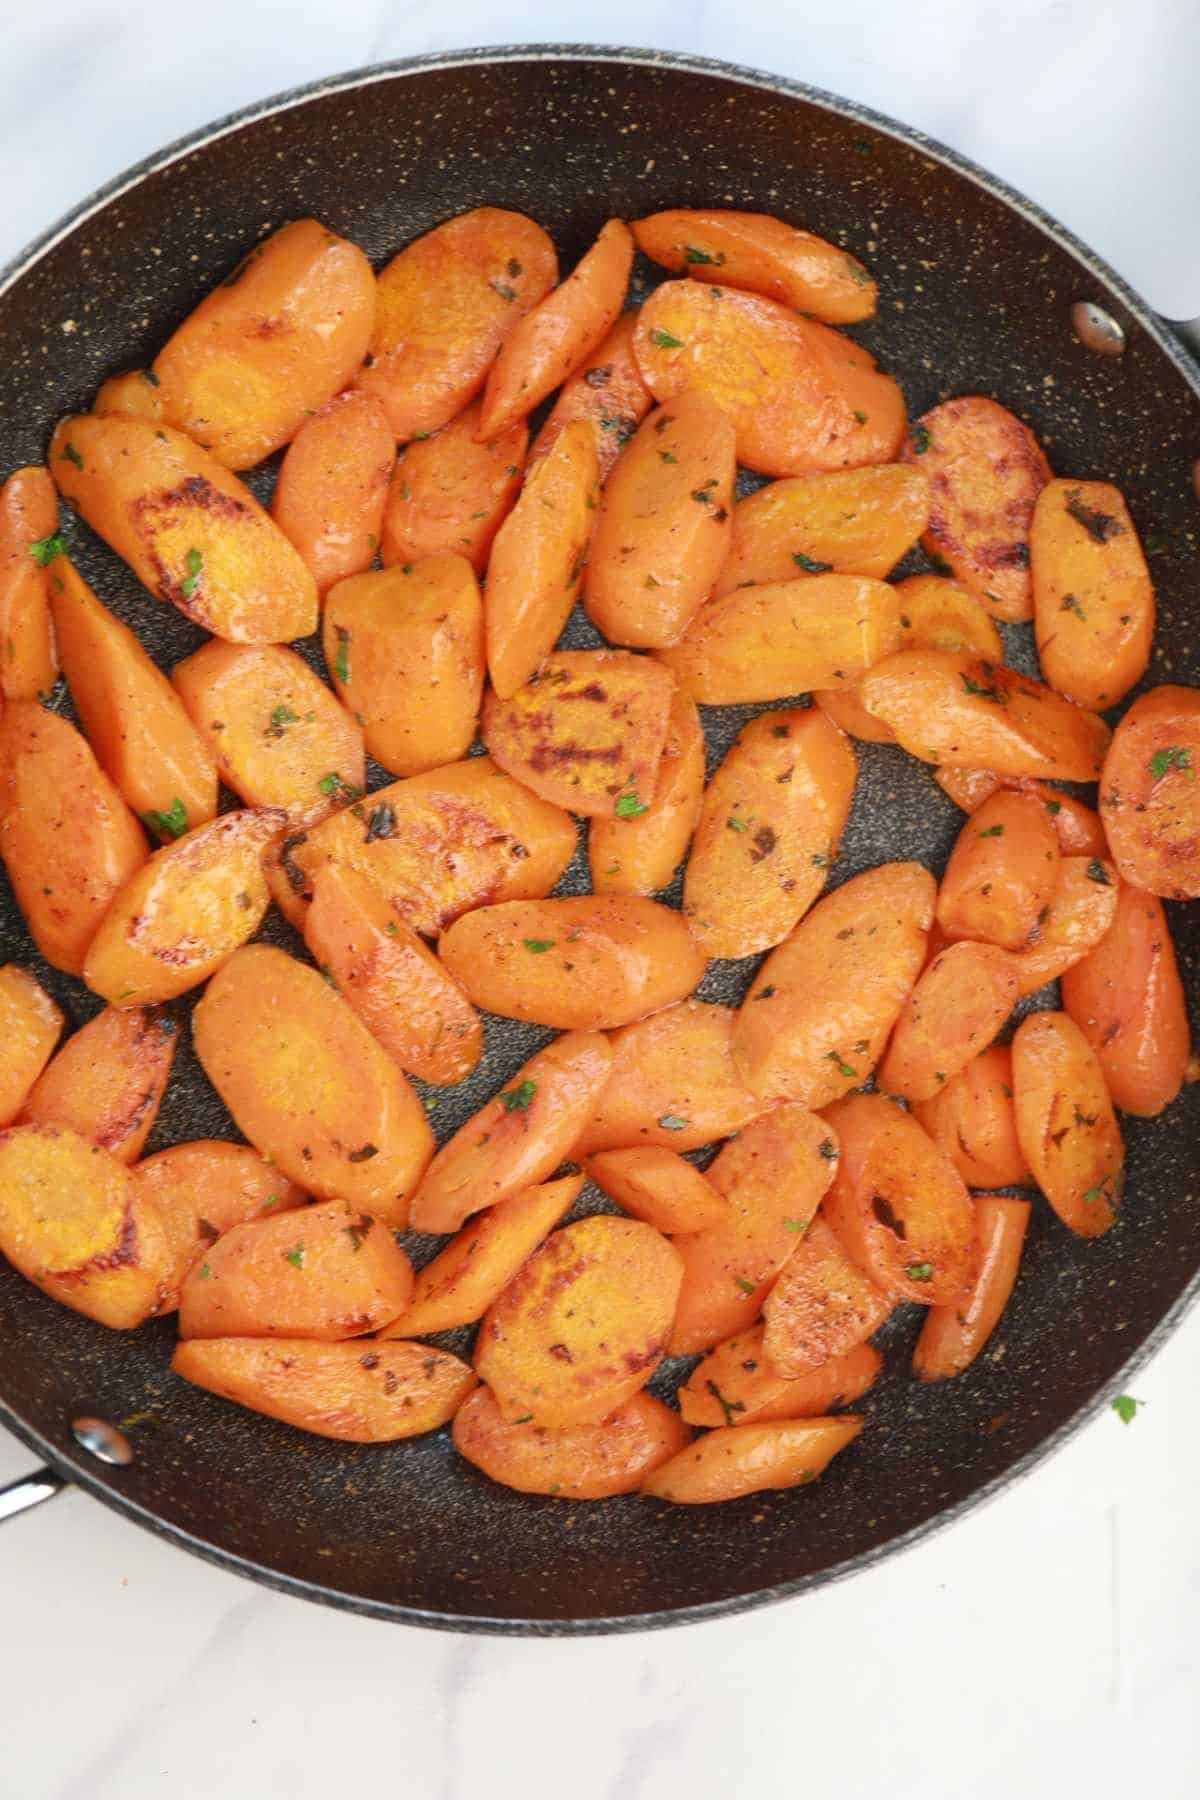 pan fried carrots in a skillet.